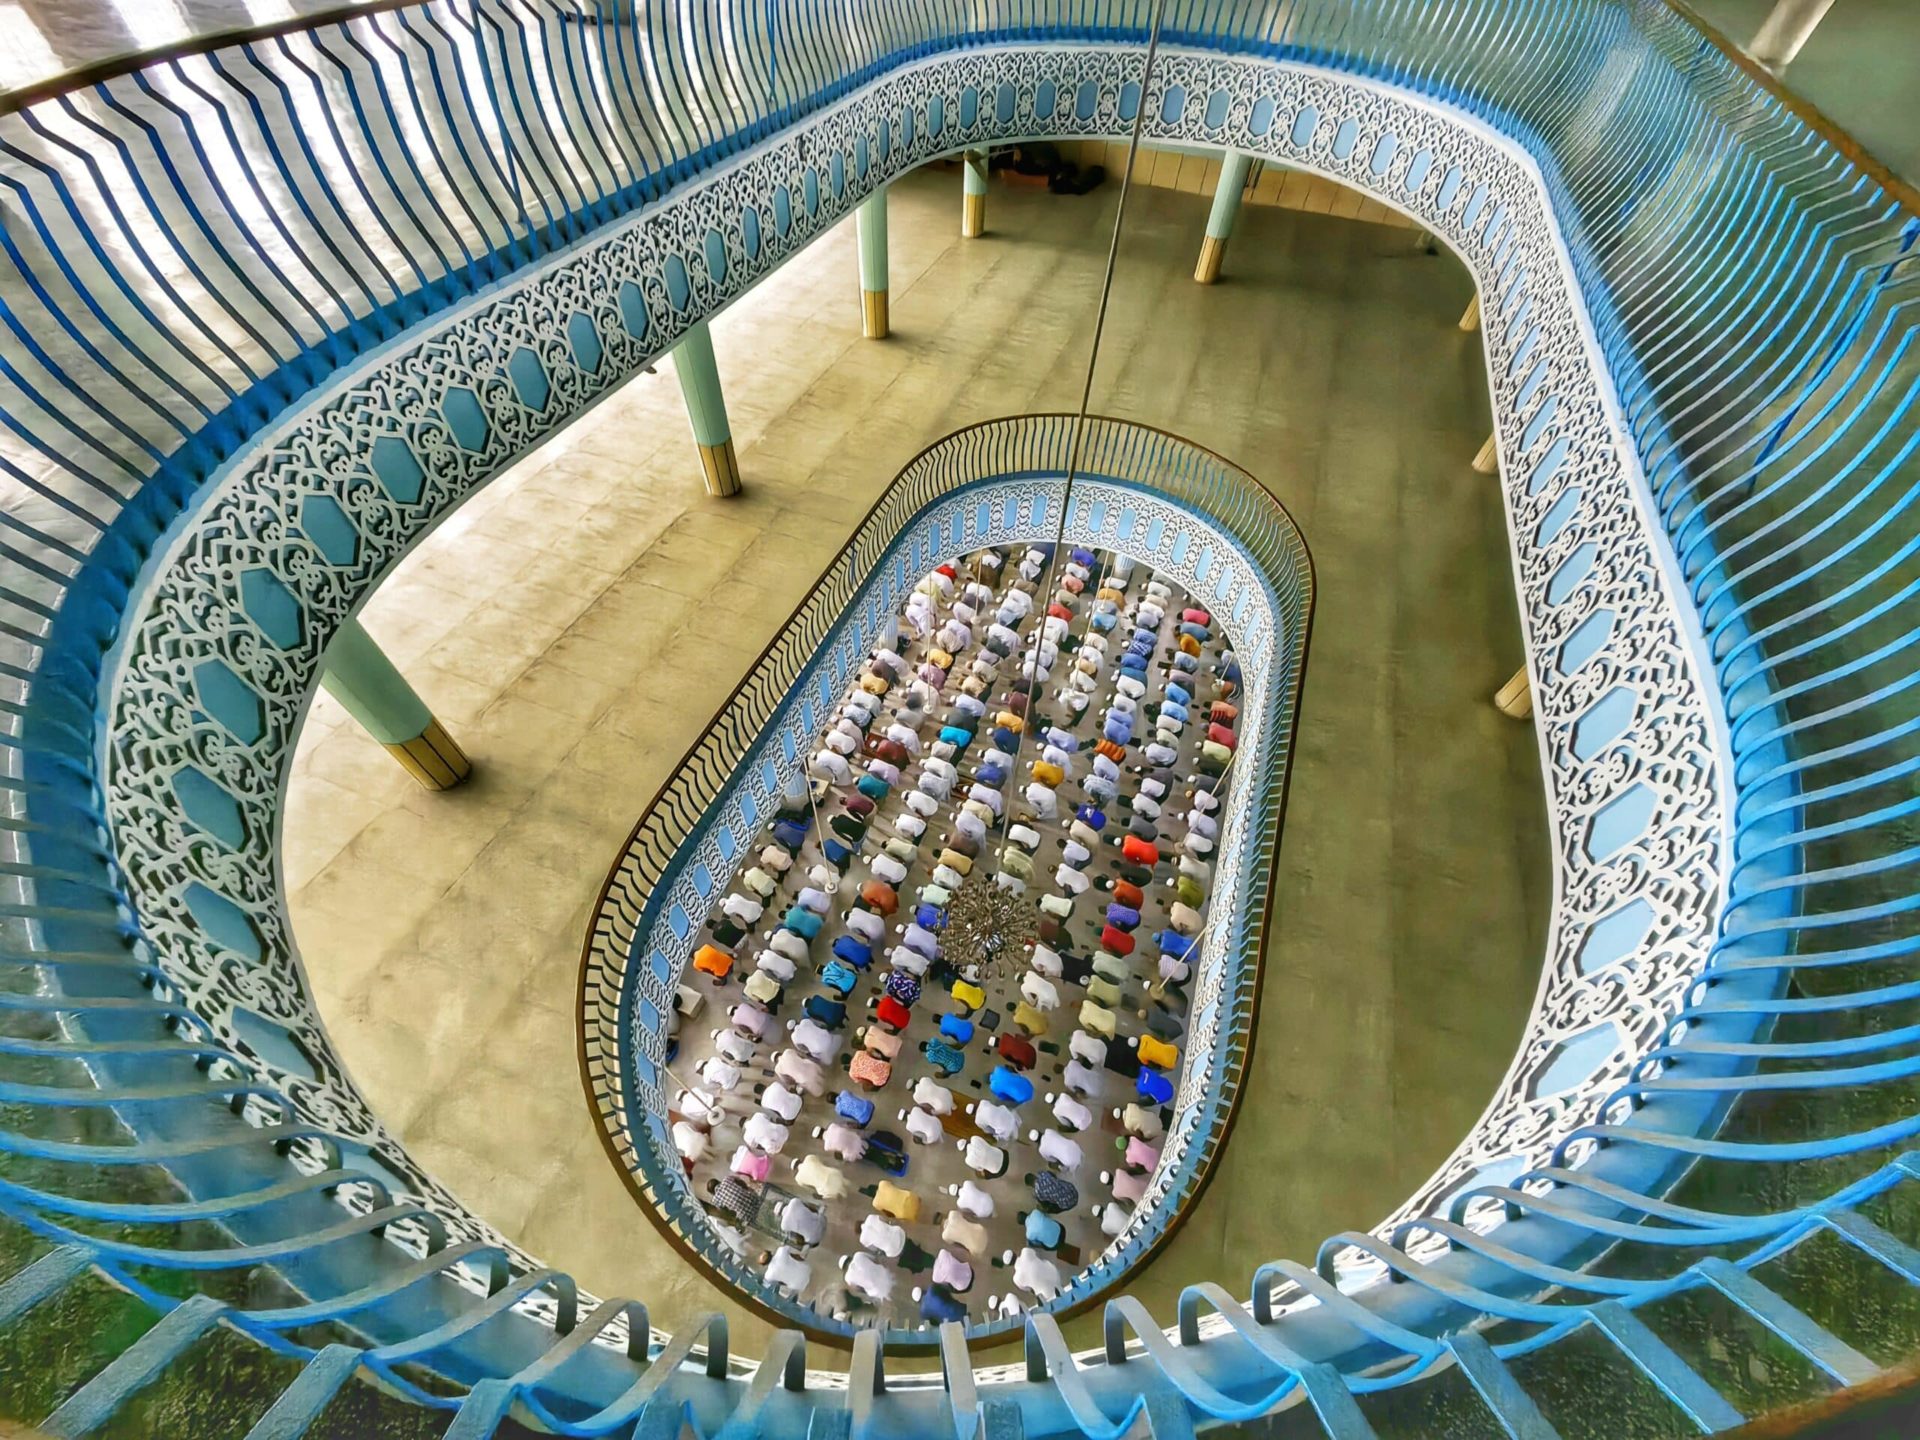 View of the inside of a mosque from above.